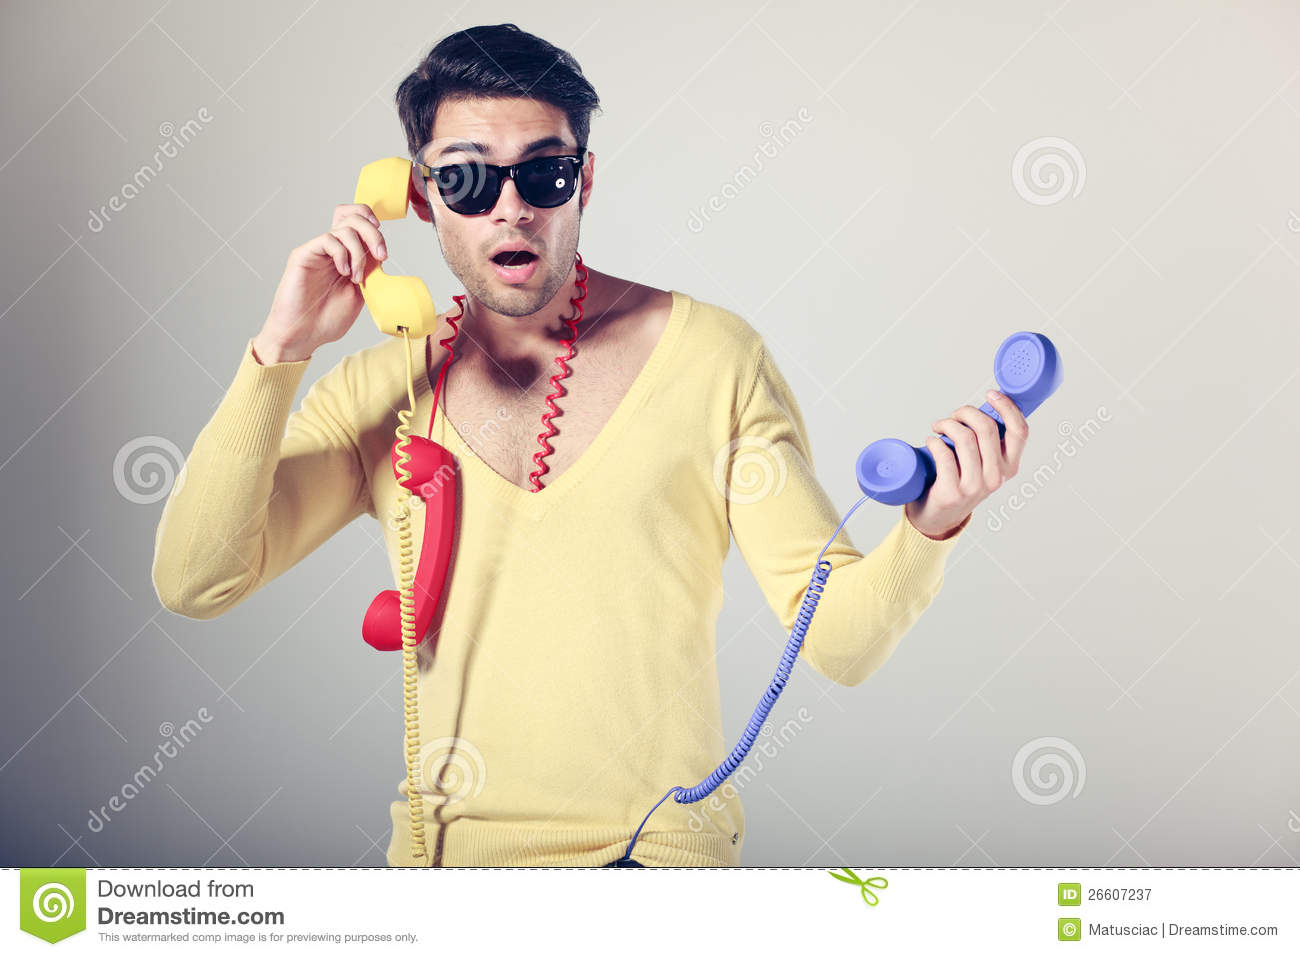     Free Stock Photography  Funny Call Center Men With Colorful Phones